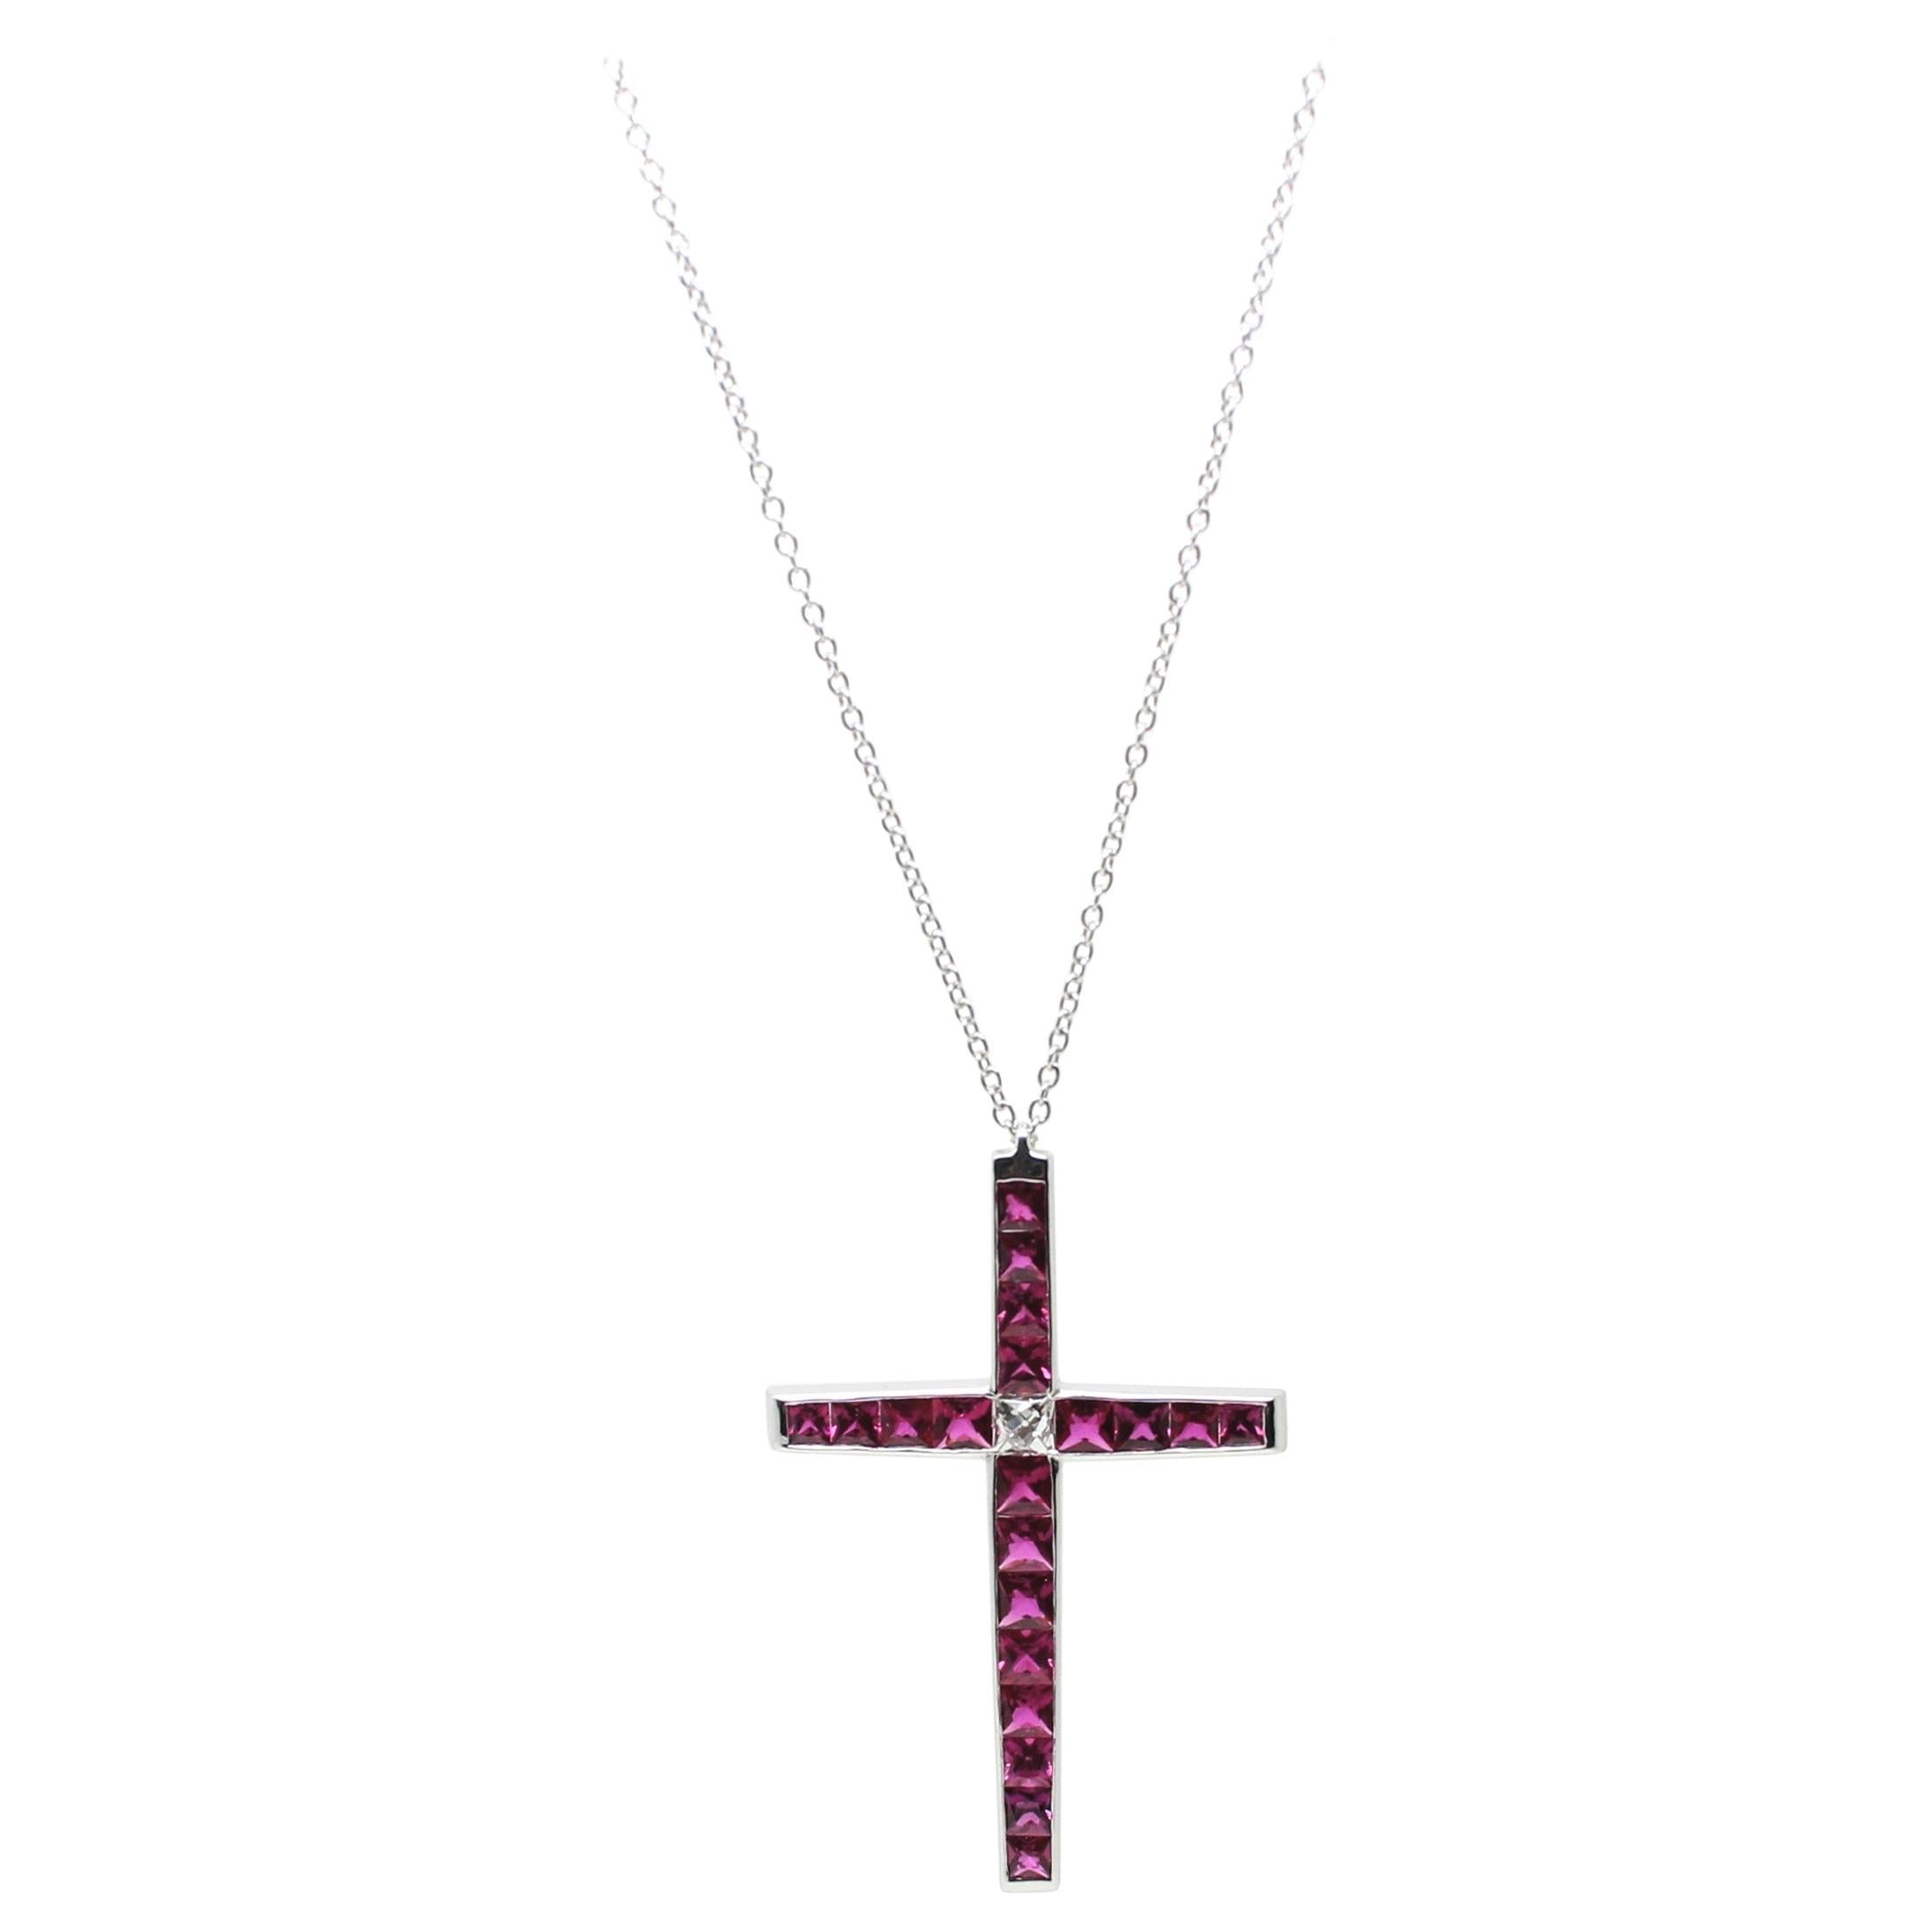 Perfectly Modern Designed Carrè Ruby Cross composed of  20 Ruby for 2.90 Carat total, with a French Cut White Diamond in the centre.
The Vivid Red of the Ruby matches and contrasts the Shining White of the Centre Diamond of 0.25 Carat..
This Cross